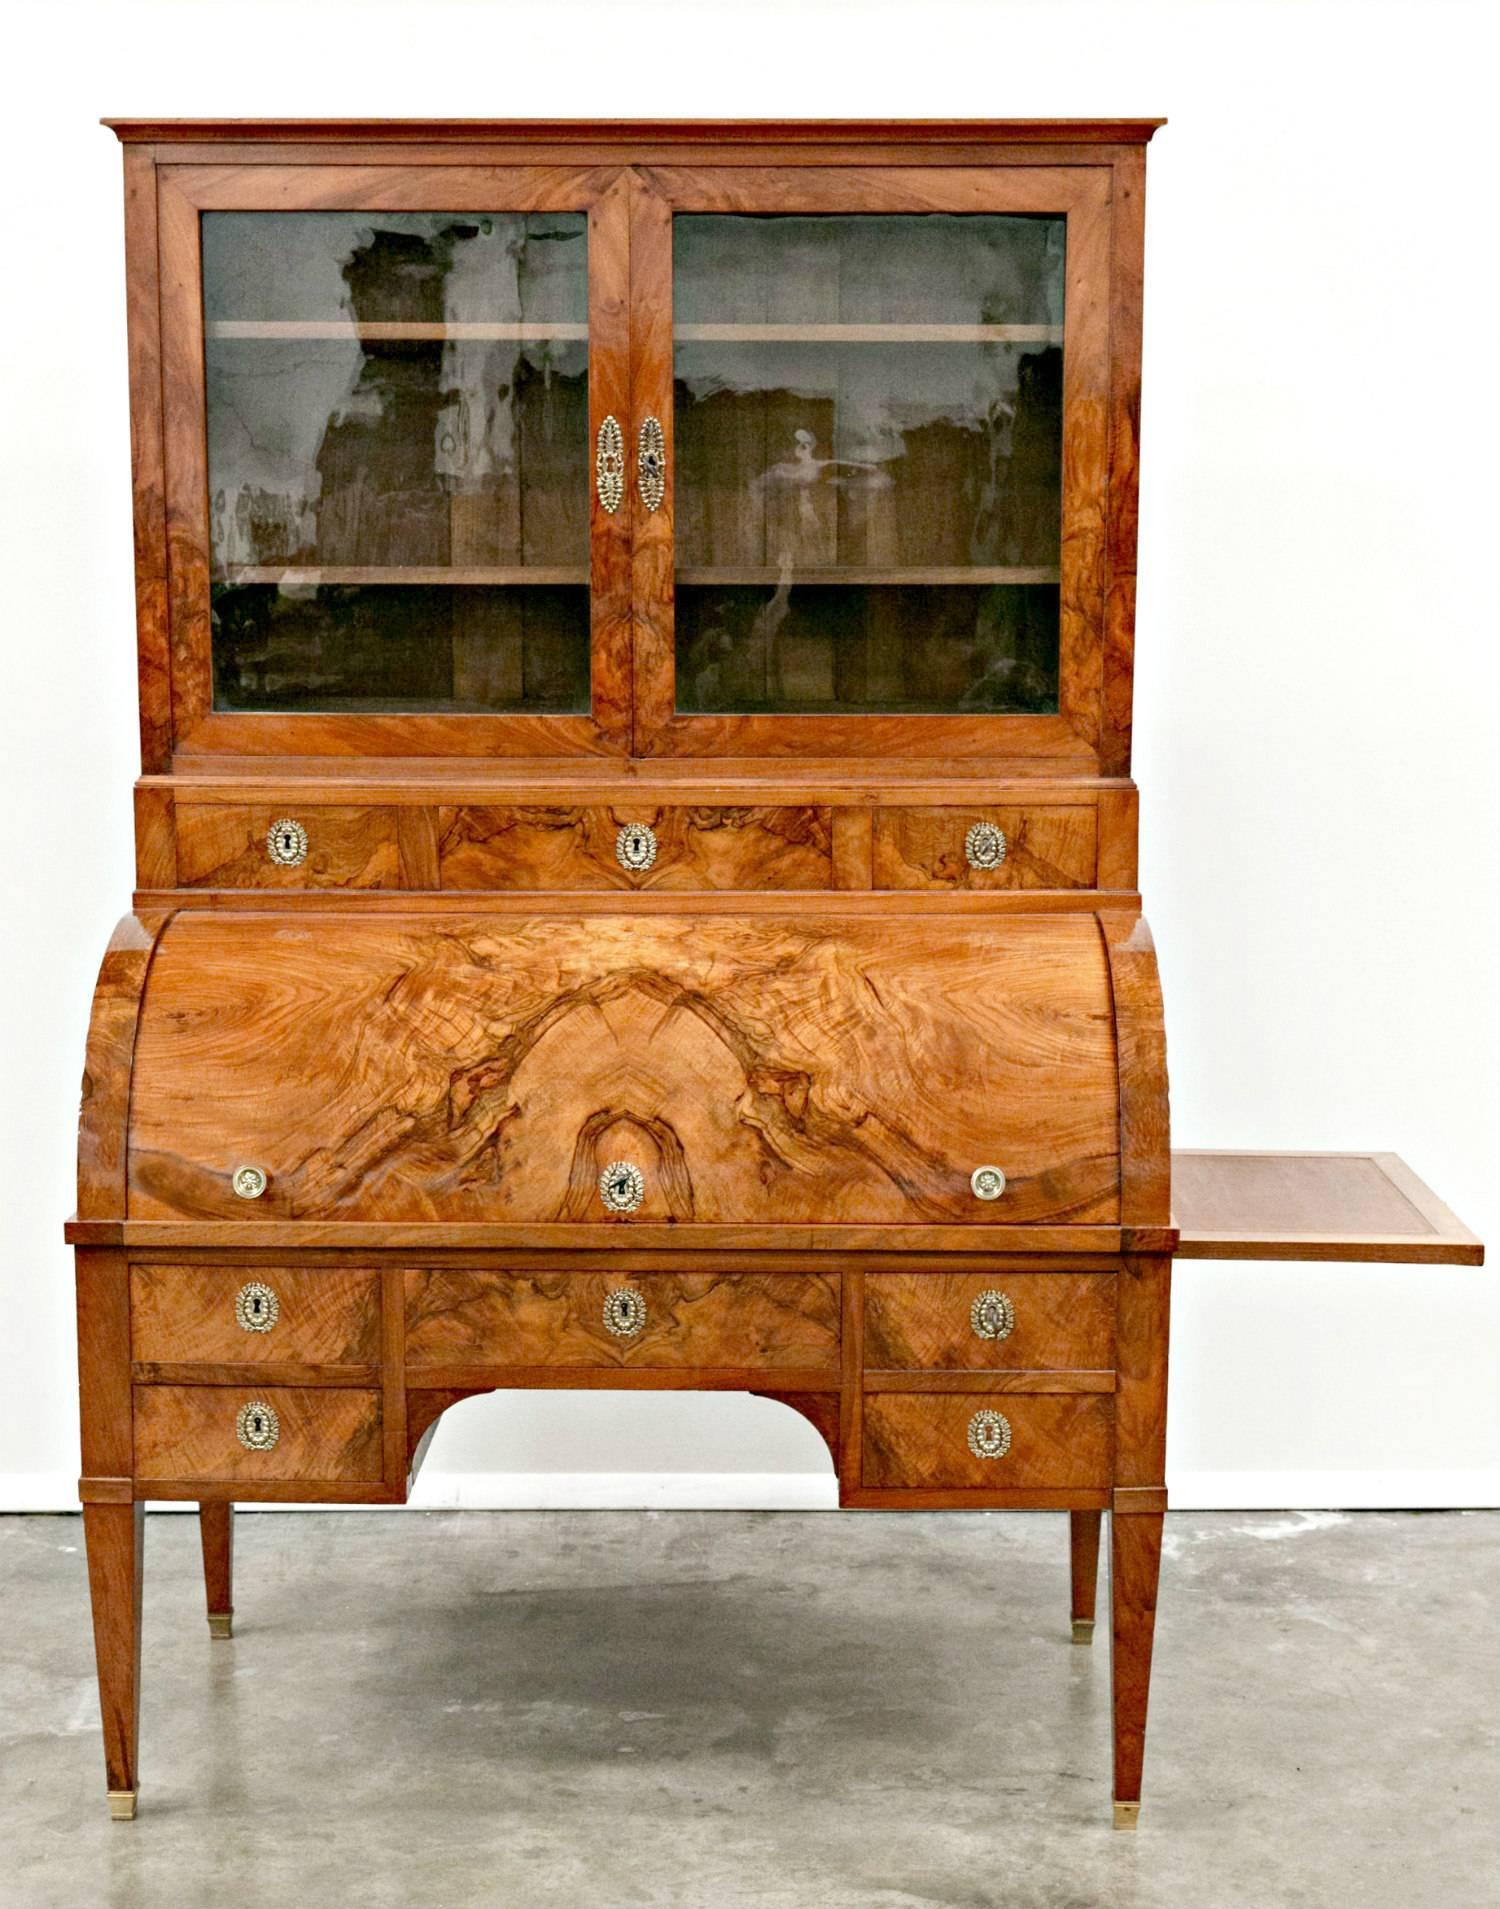 An exceptional Louis XVI period bureau à cylindre, or cylinder desk with bookcase, giving you a glimpse of the beauty of fine 18th century French furniture. The desk exhibits an exceptional blend of restrained, neoclassical elements and is formed